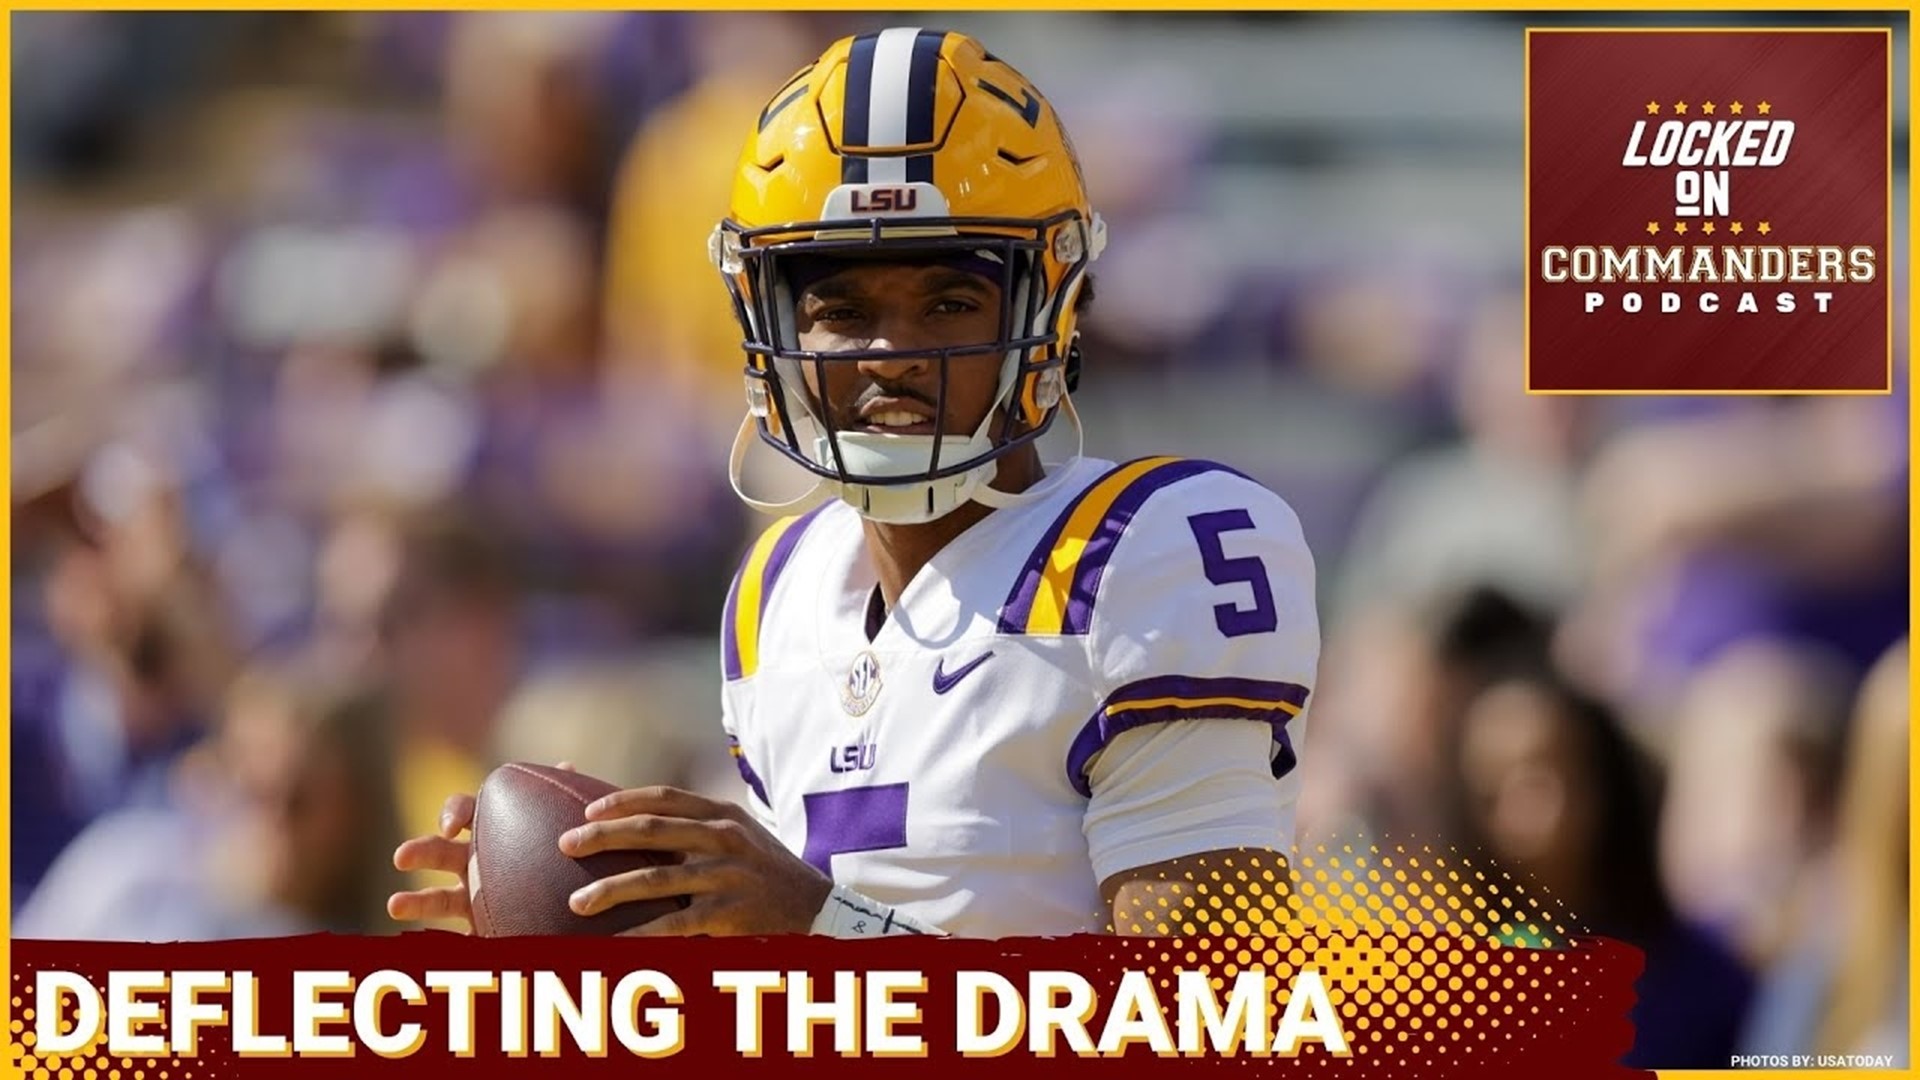 The Washington Commanders are still projected to land quarterback Jayden Daniels with the 2nd Overall pick in the NFL Draft, but not without some drama.